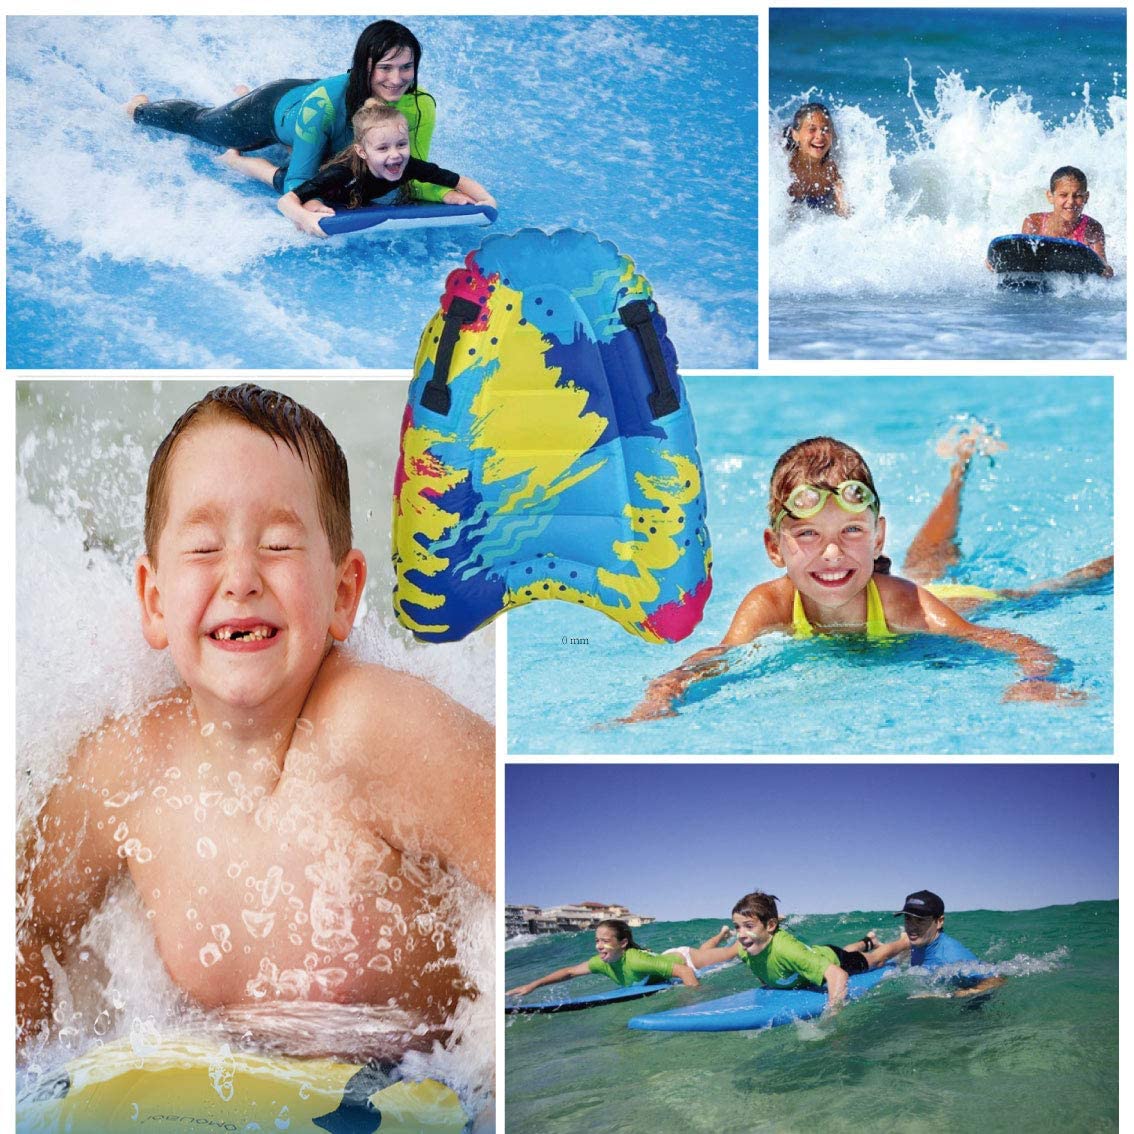 Inflatable Body Surfing Float Board Surf Rider for Slip and Slides Pool Water Game Portable Dual Buggie Board Wave Bodyboard Water Beach Fun Toy Double-Color Design for Kids and Adult 3020Inch Colorful